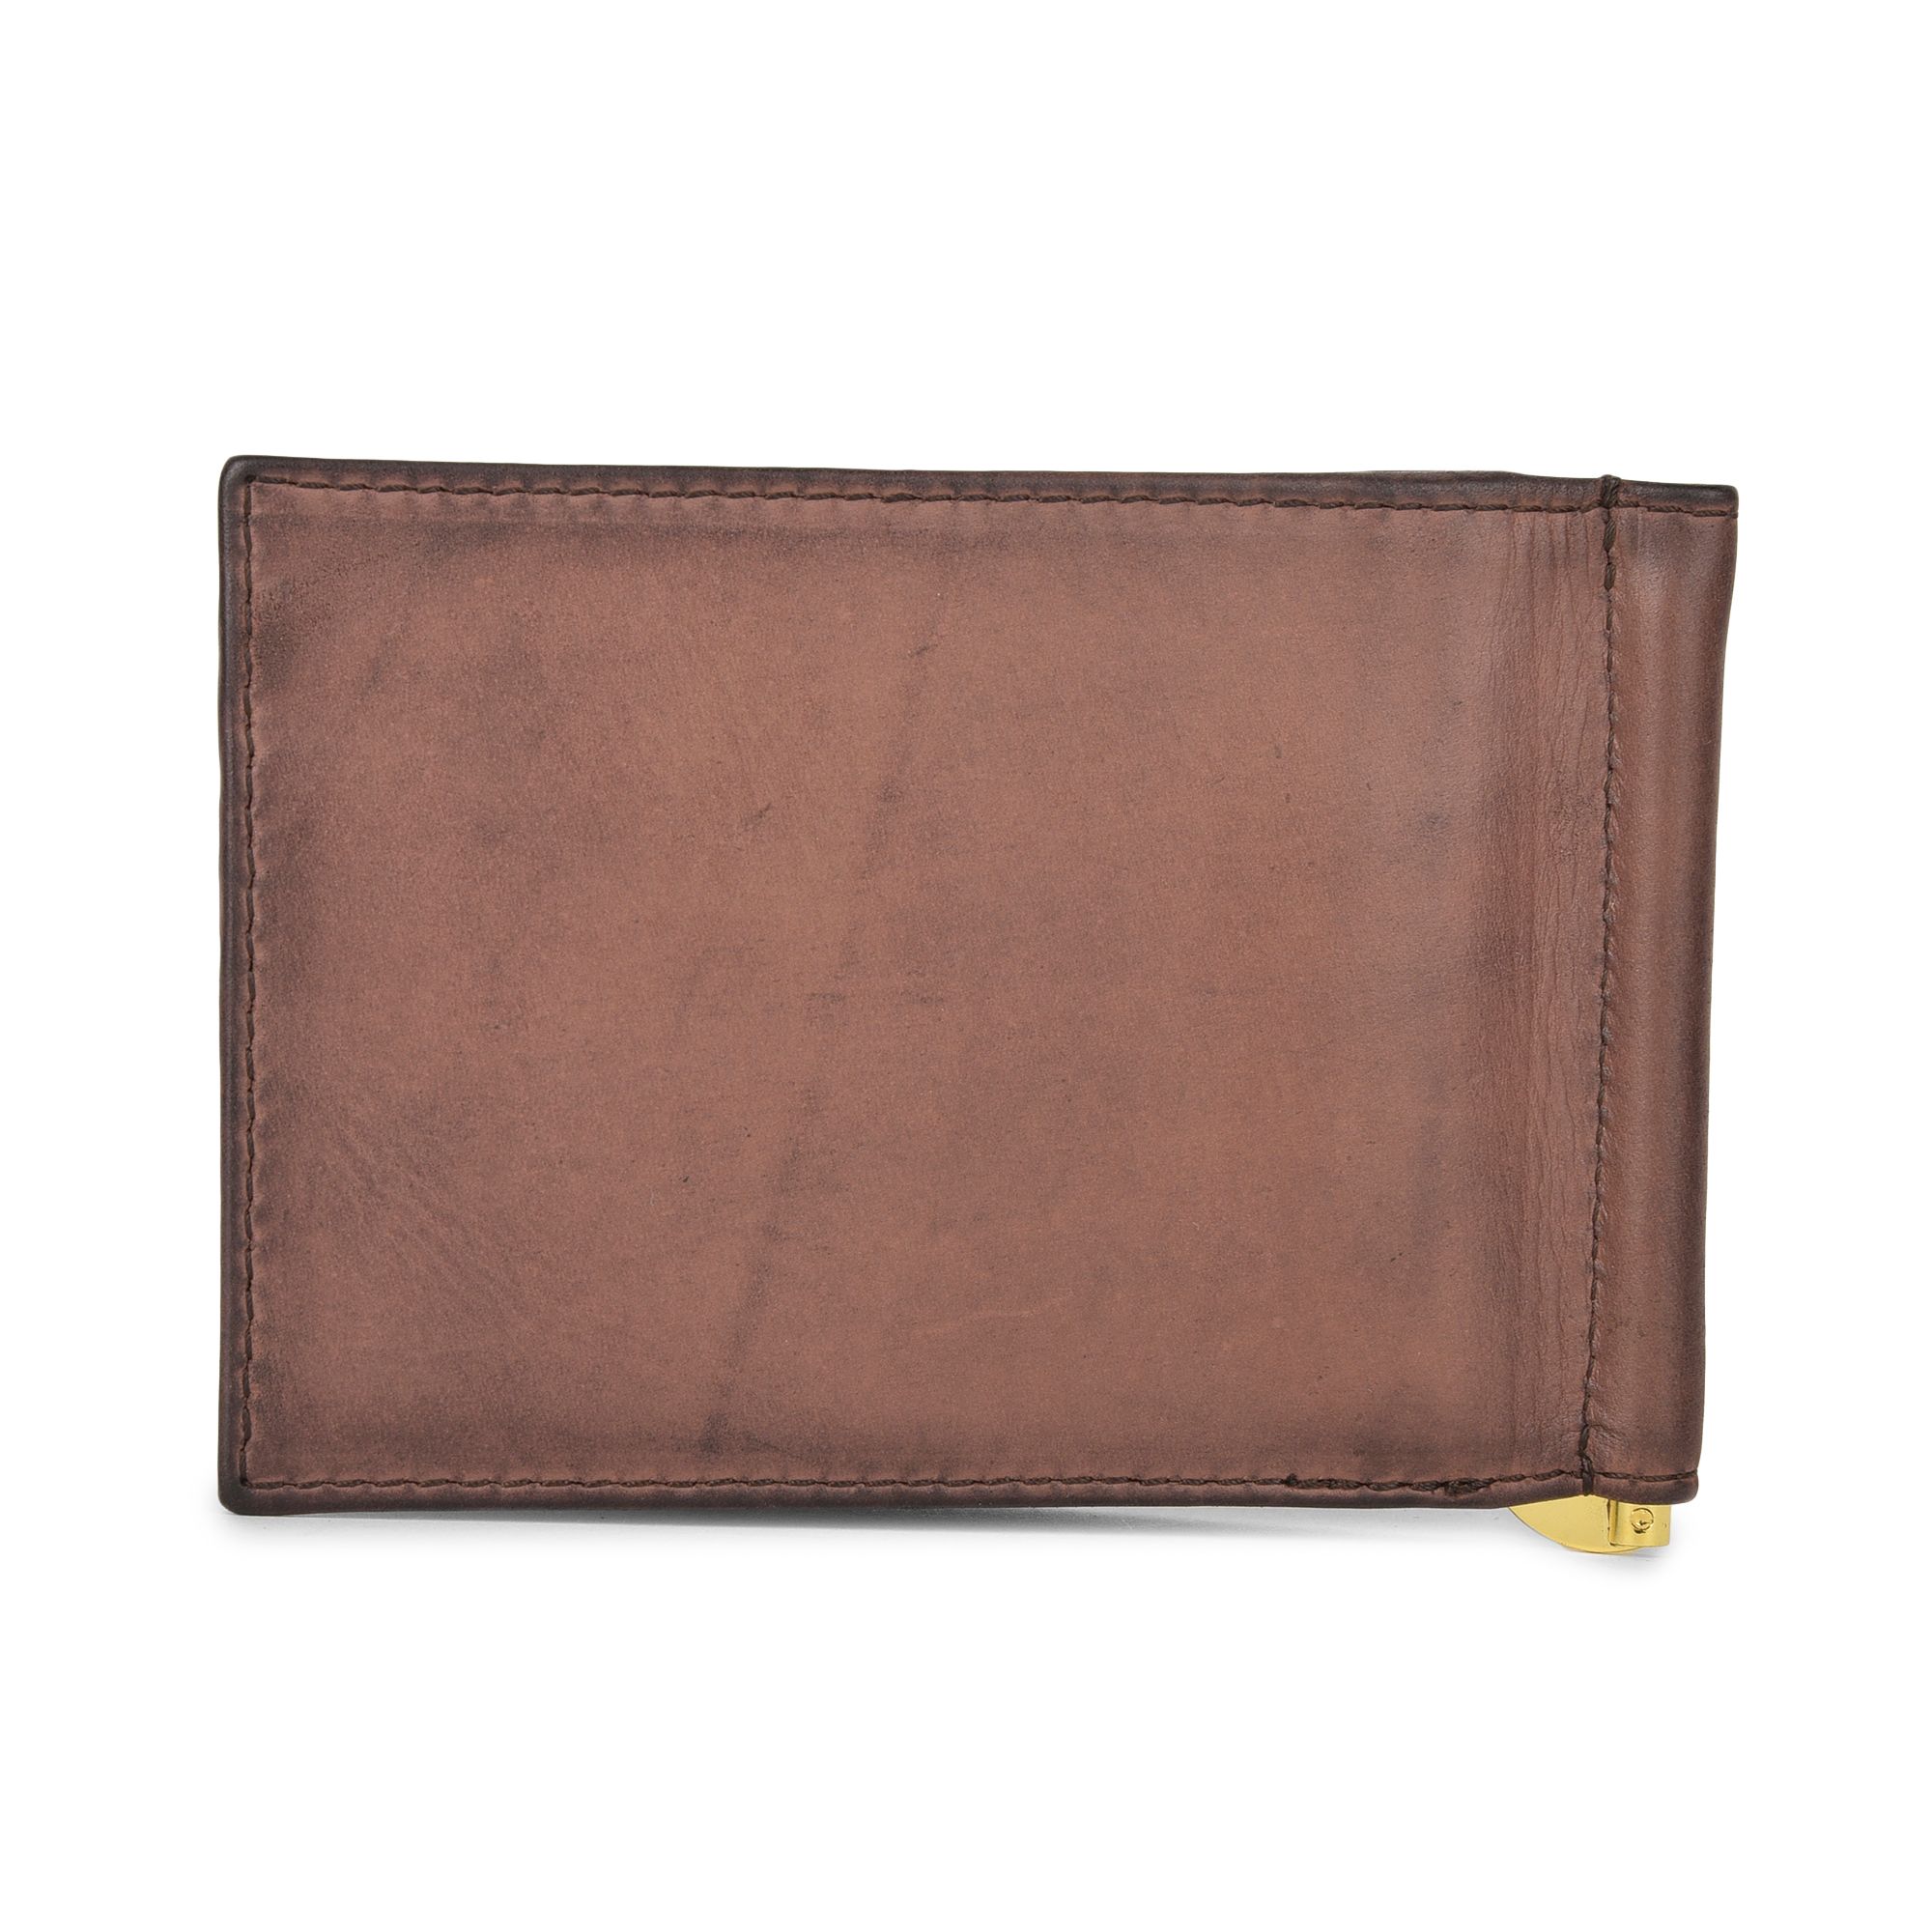 Brown leather wallet with money clipper